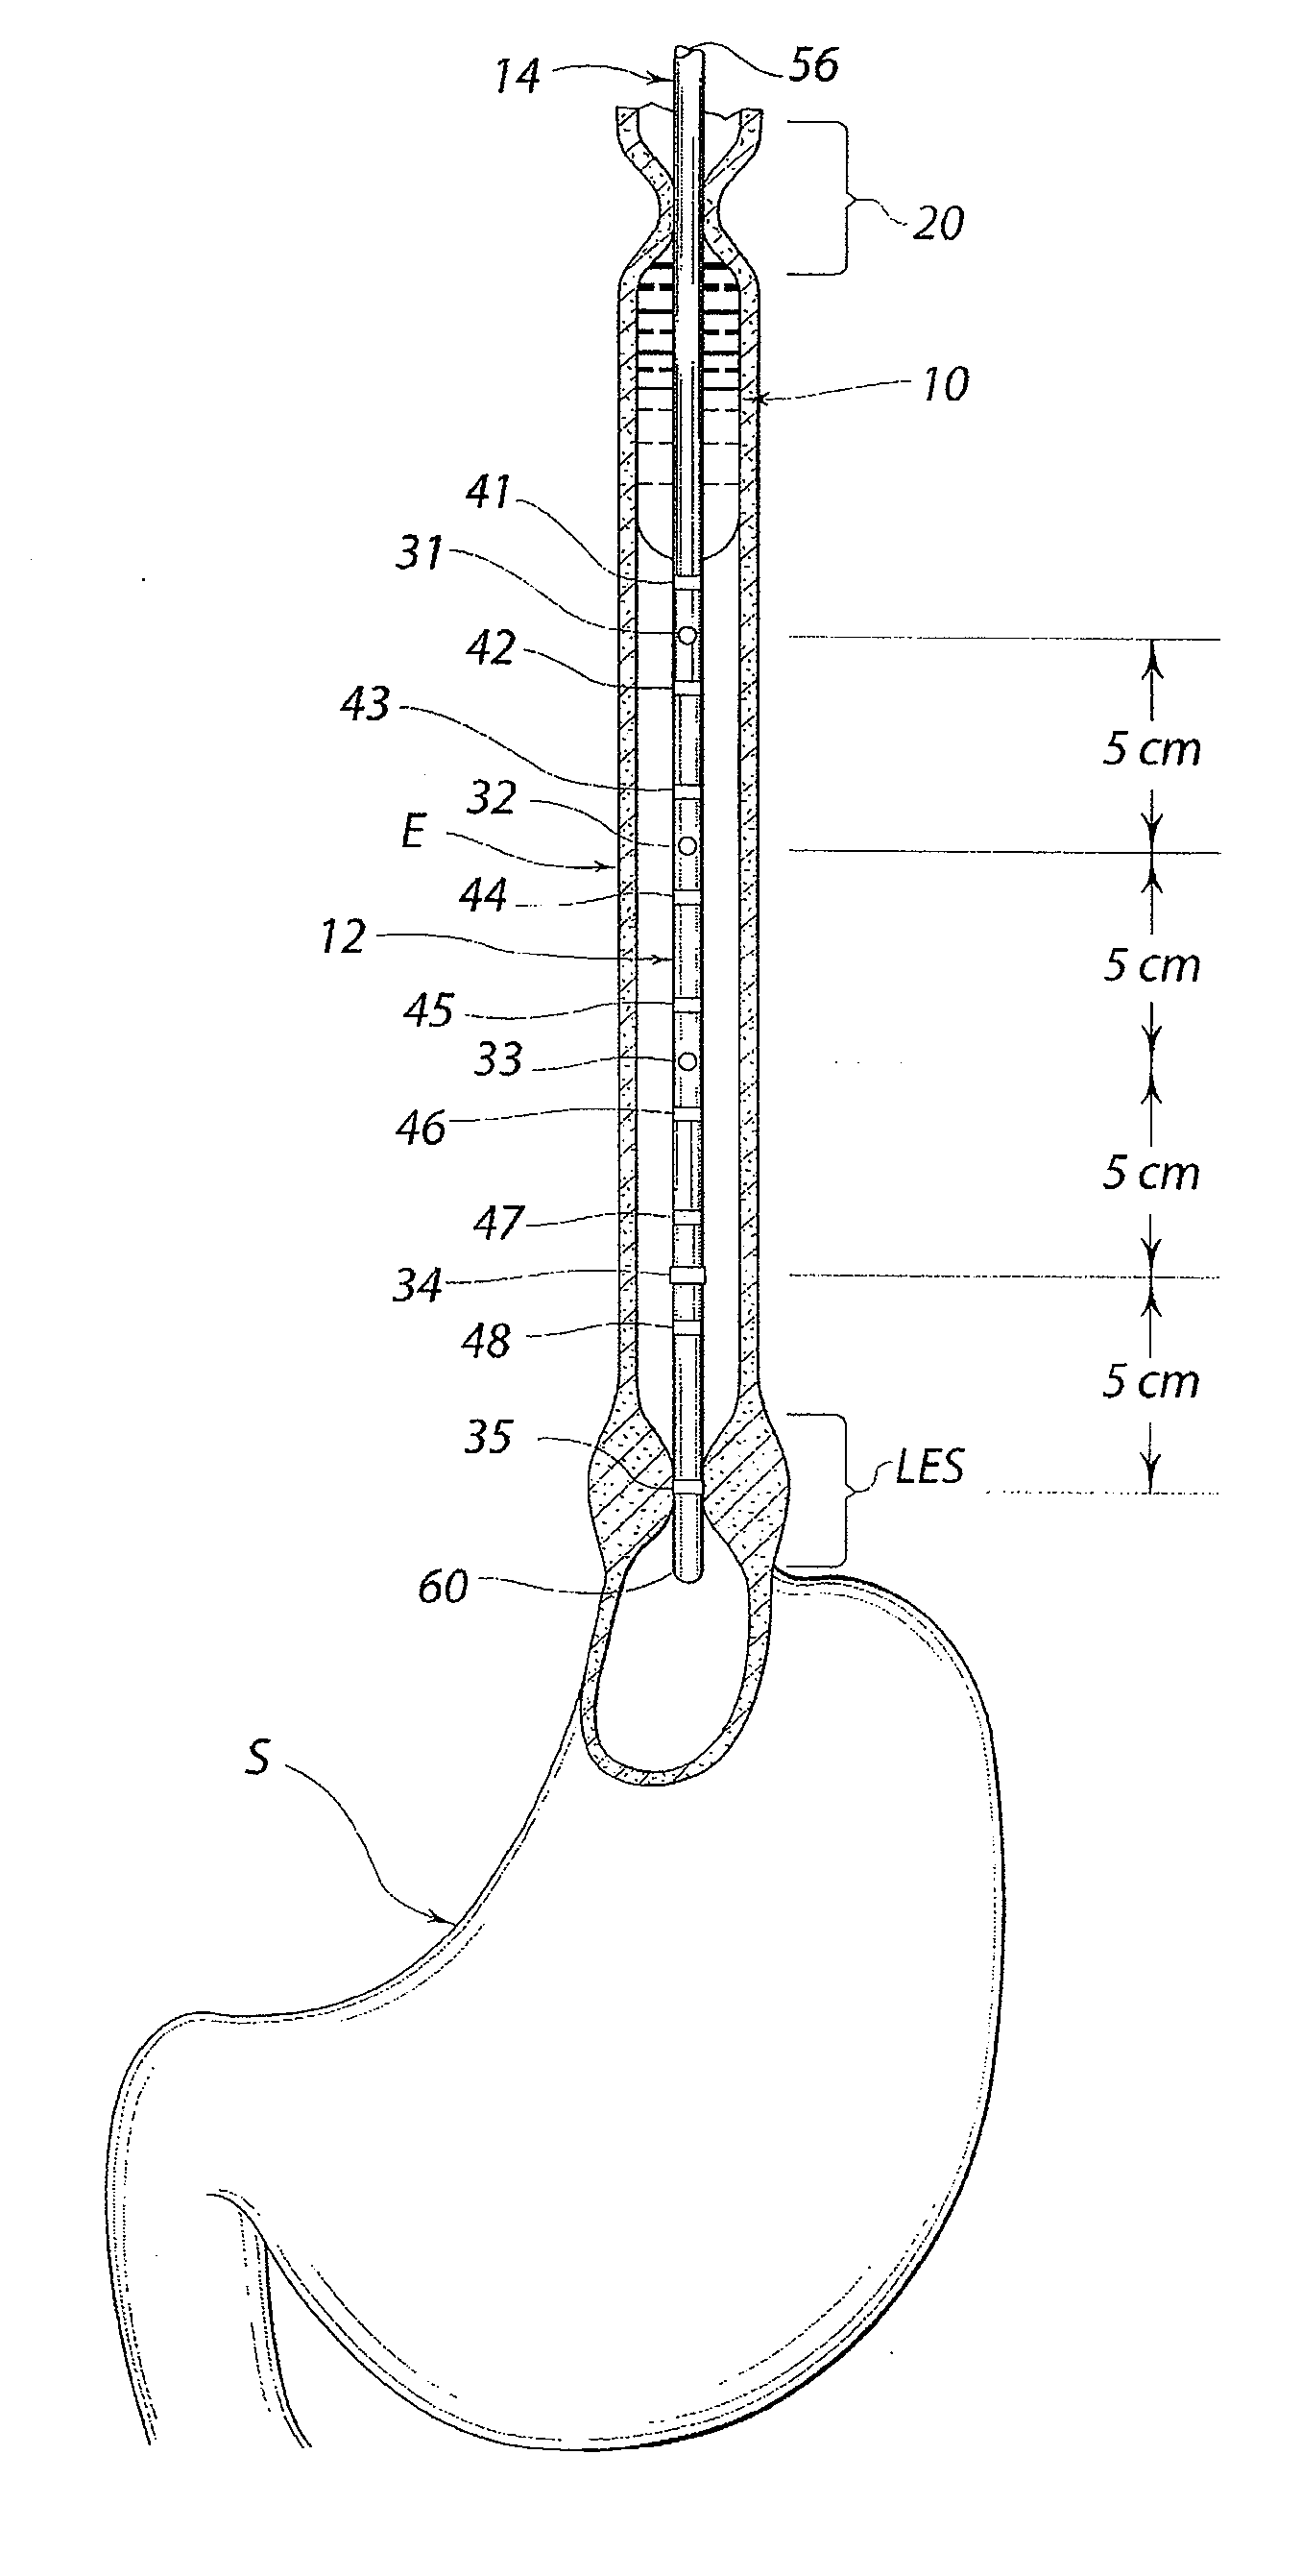 Method of esophageal function testing with a standardized thixotropic swallow challenge medium